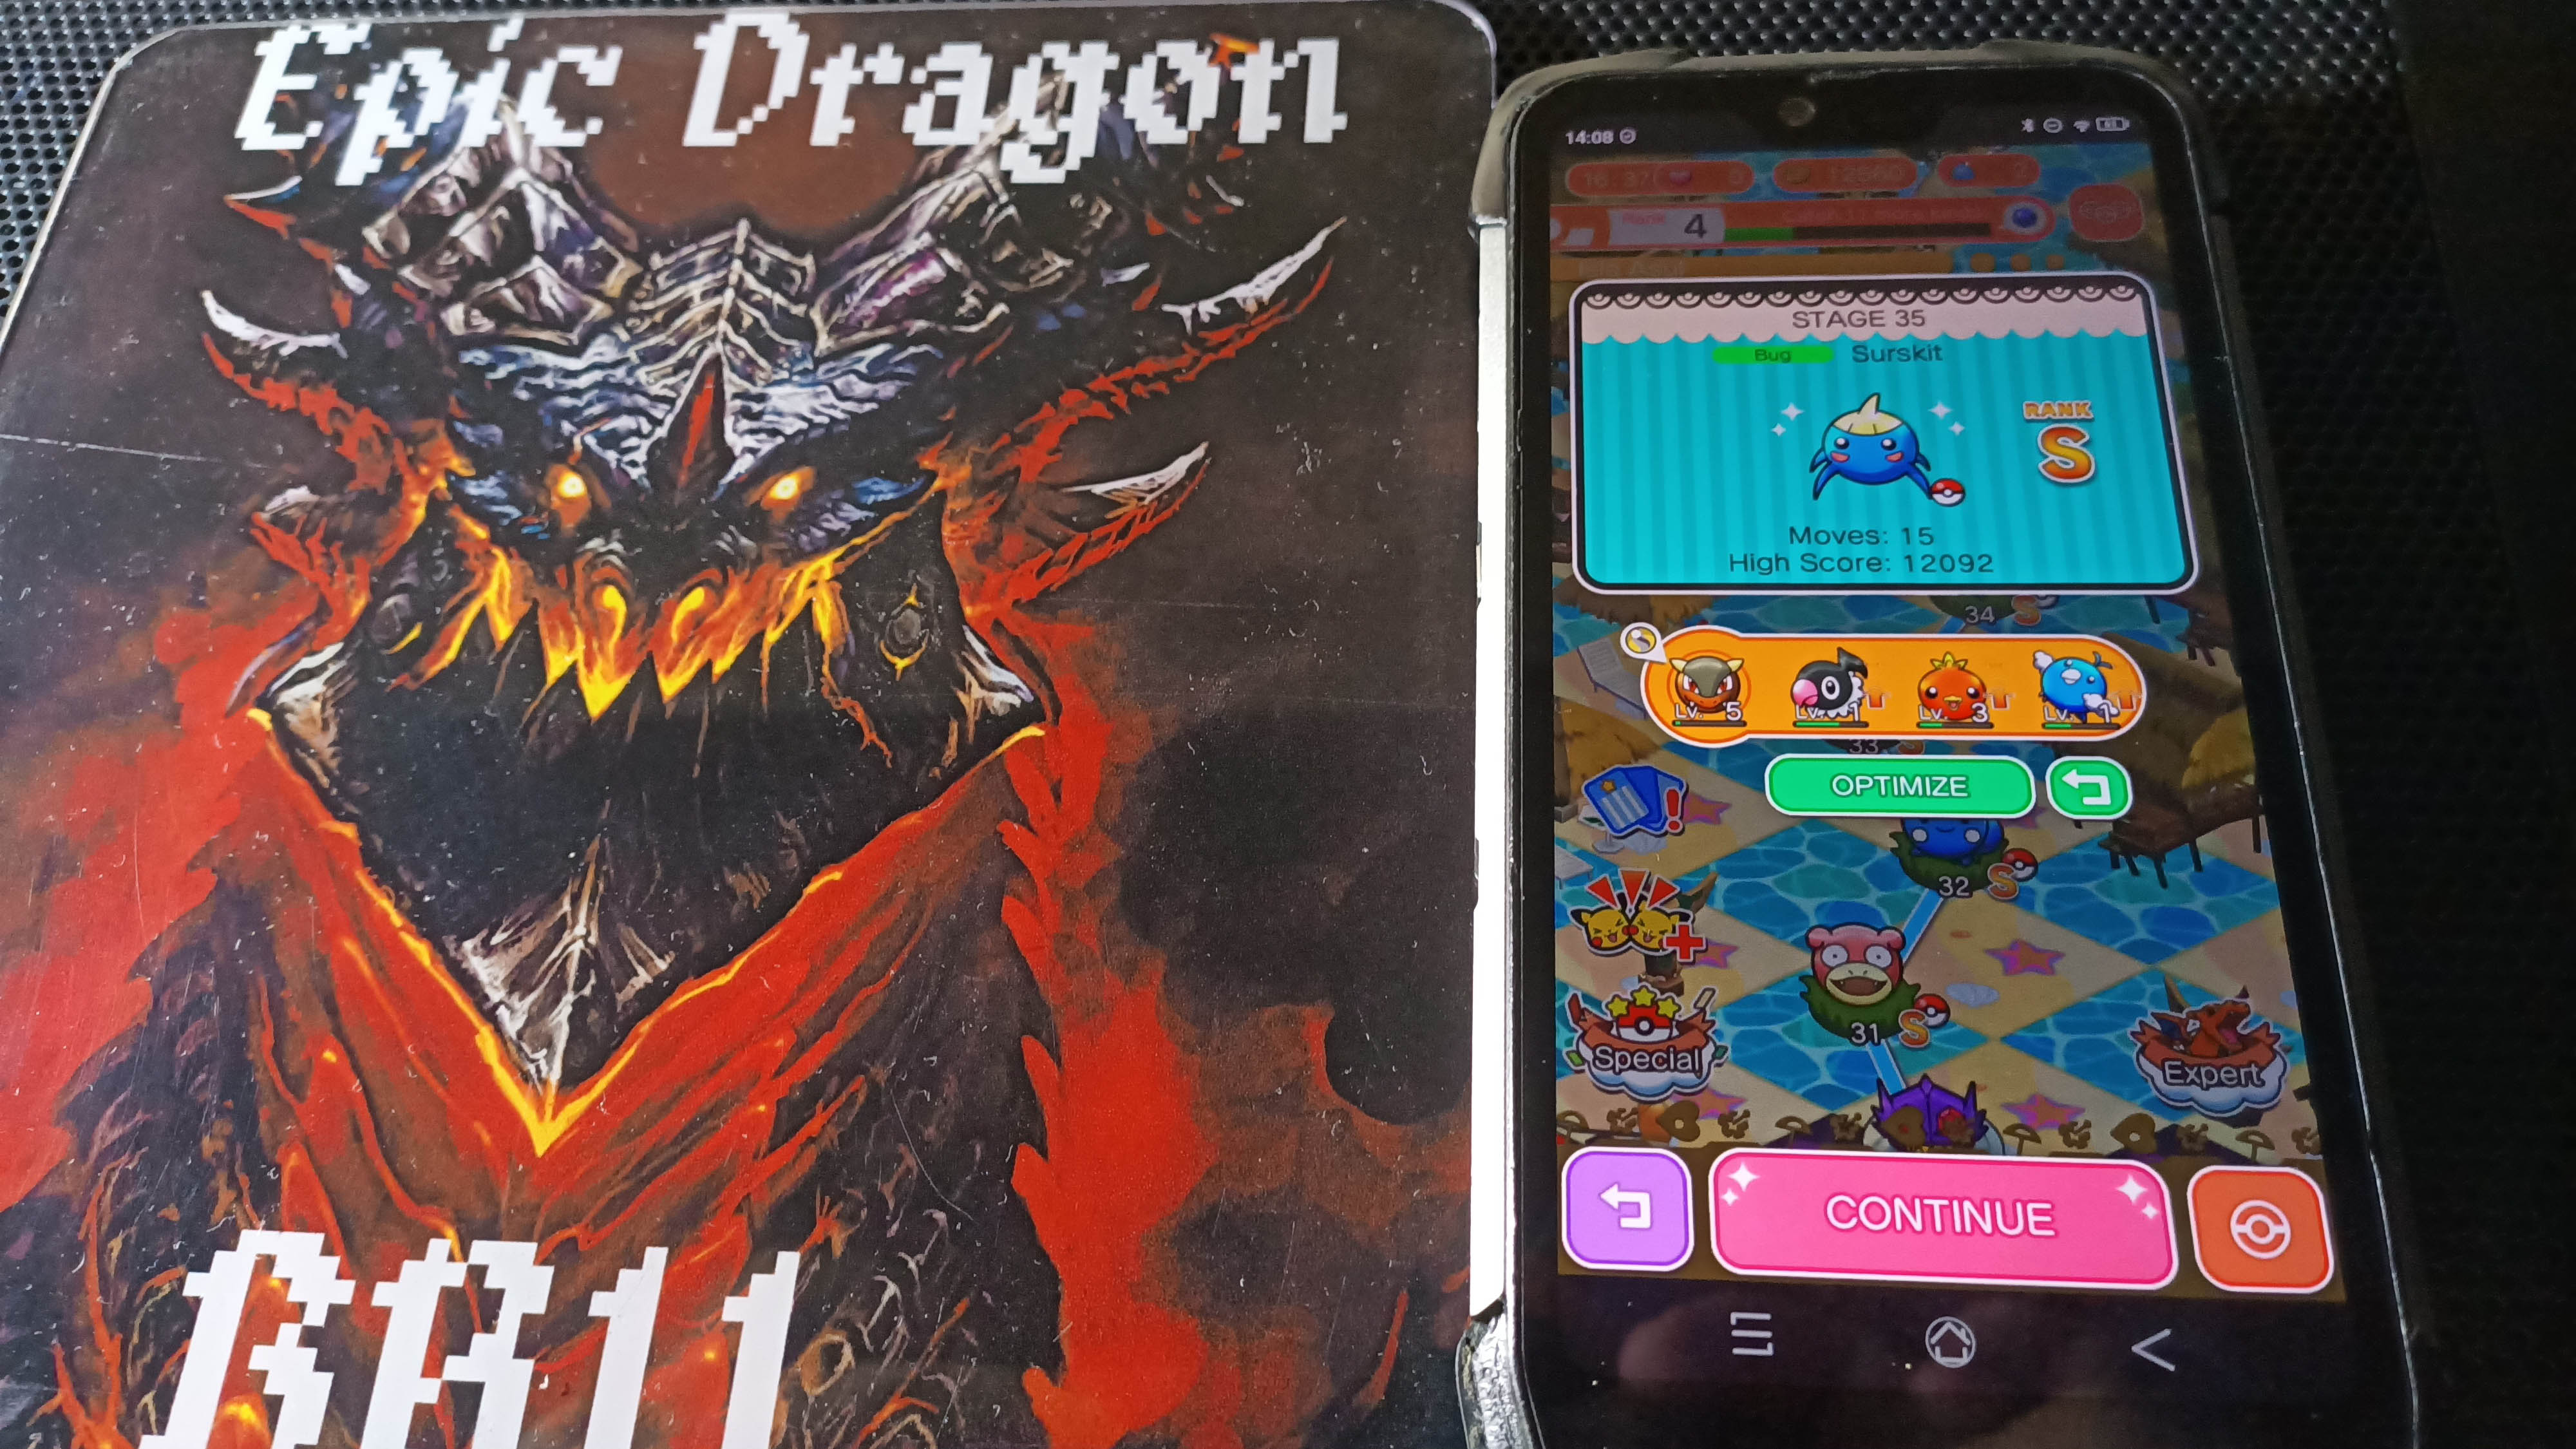 EpicDragon: Pokemon Shuffle Mobile: Stage 035 (Android) 12,092 points on 2022-09-09 17:19:18